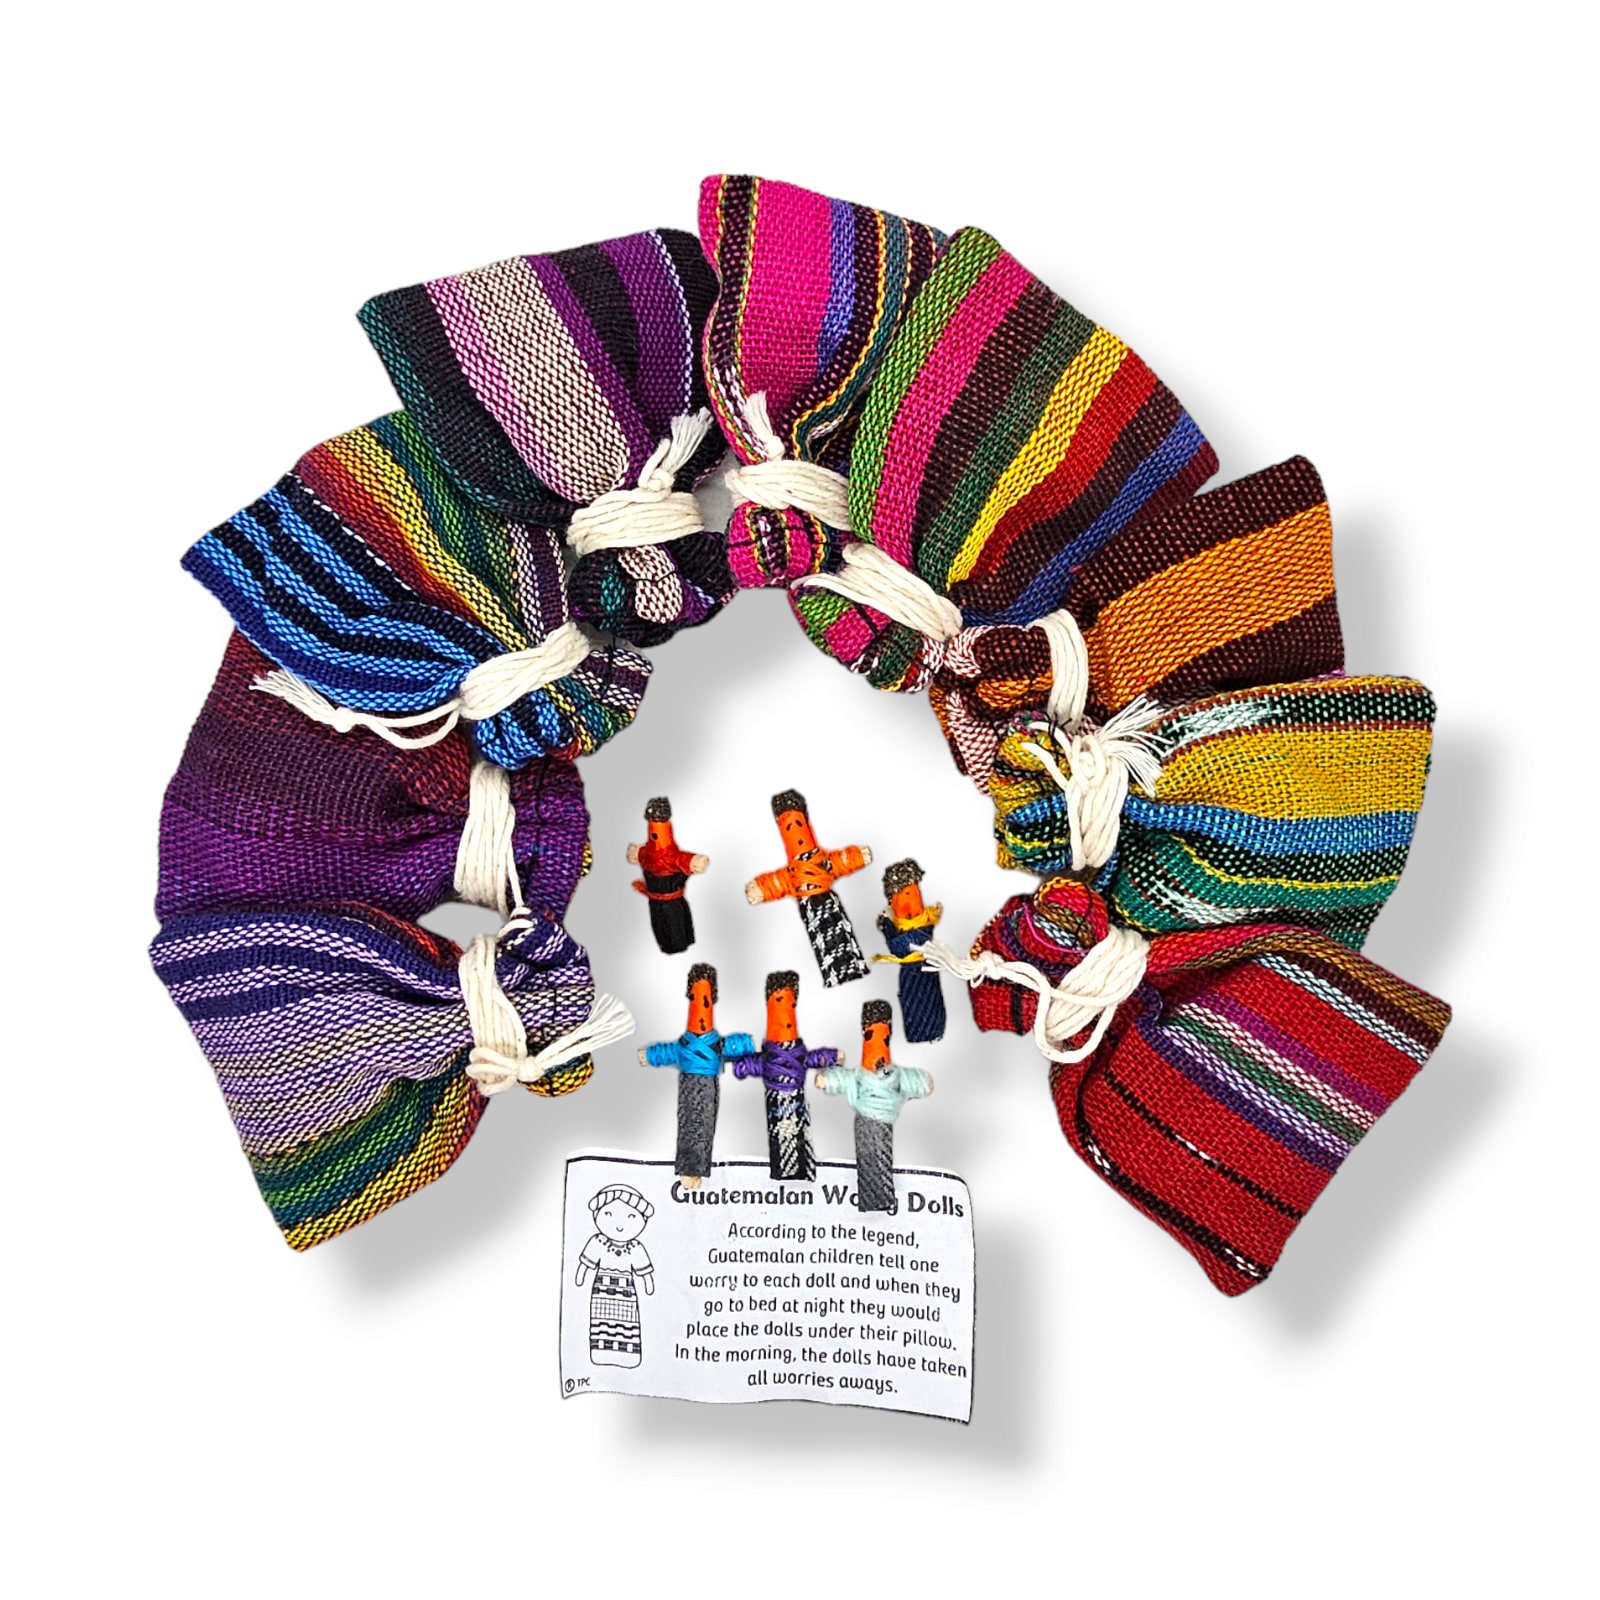 52 150 Worry Dolls in Bulk from Guatemala - 75 Boys and 75 Girls - Worry Doll - Guatemalan Dolls - Mayan - Trouble - Anxiety - Peop